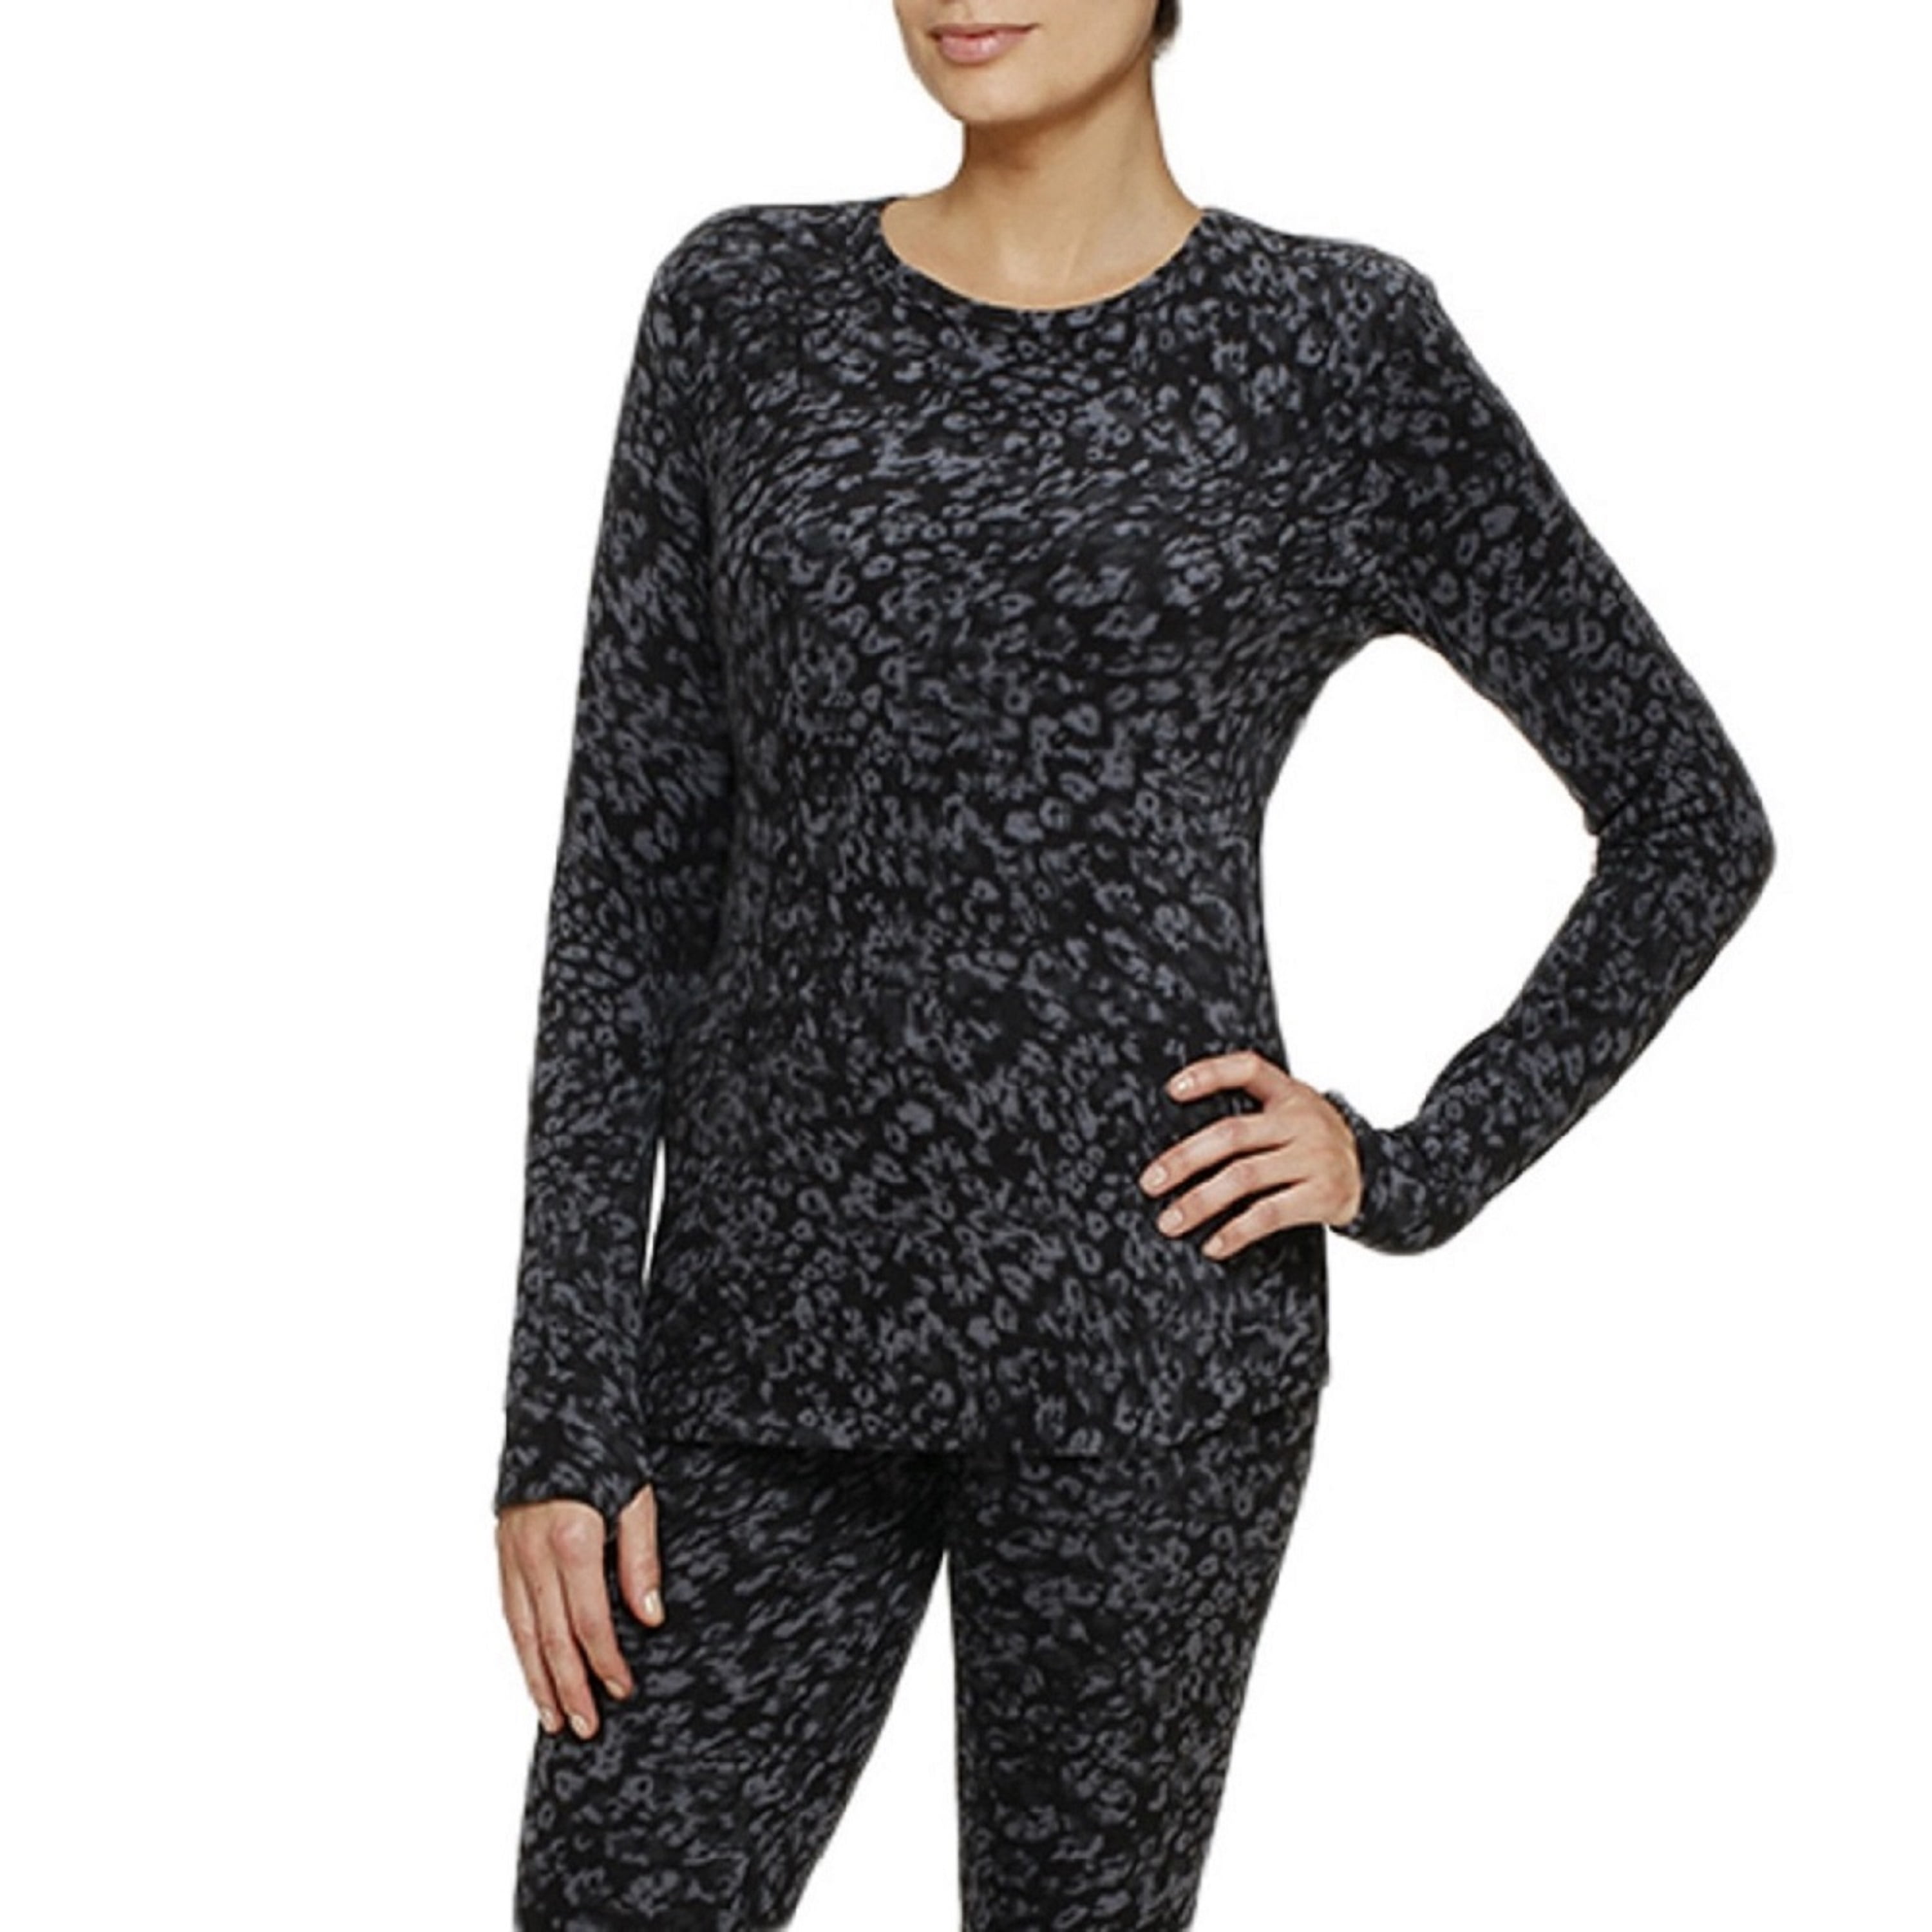 ClimateRight by Cuddl Duds Women's and Women's Plus Stretch Fleece Warm ...